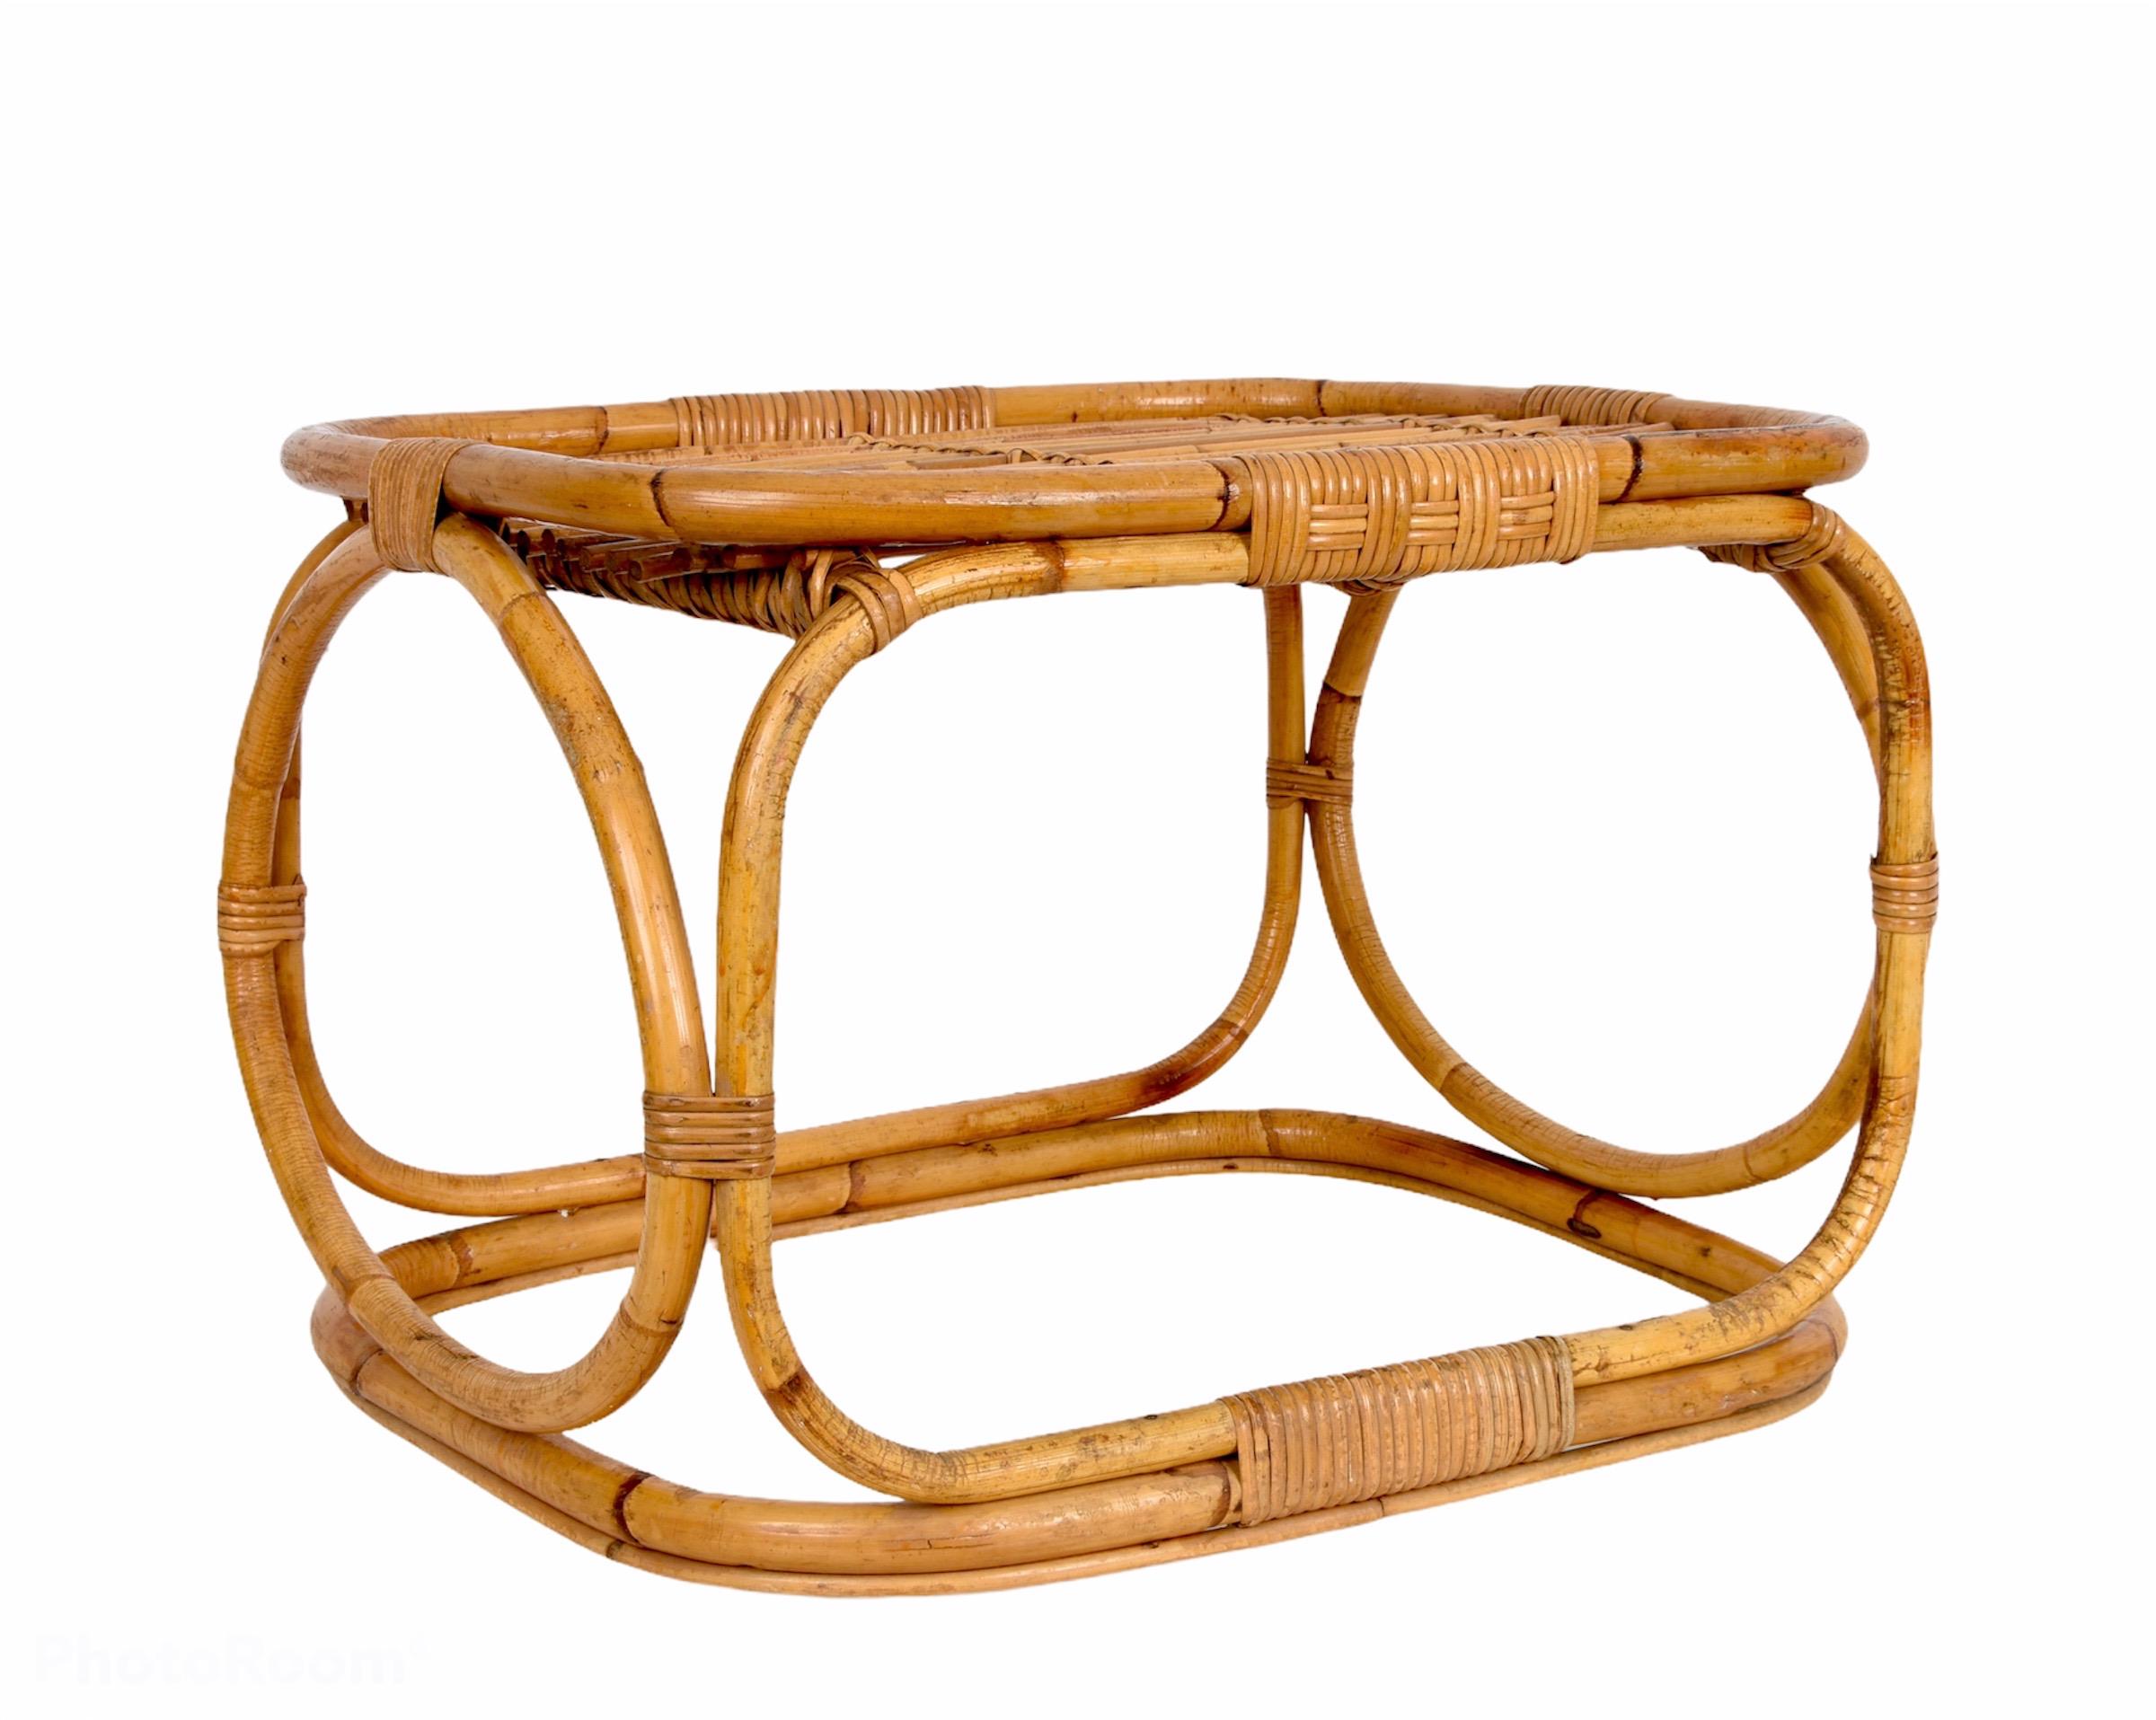 Amazing midcentury rattan and bamboo coffee table. This fantastic piece was designed in the style of Tito Agnoli in Italy during the 1960s

This piece features a solid bamboo structure, with an oval decoration on two sides and rectangular on the